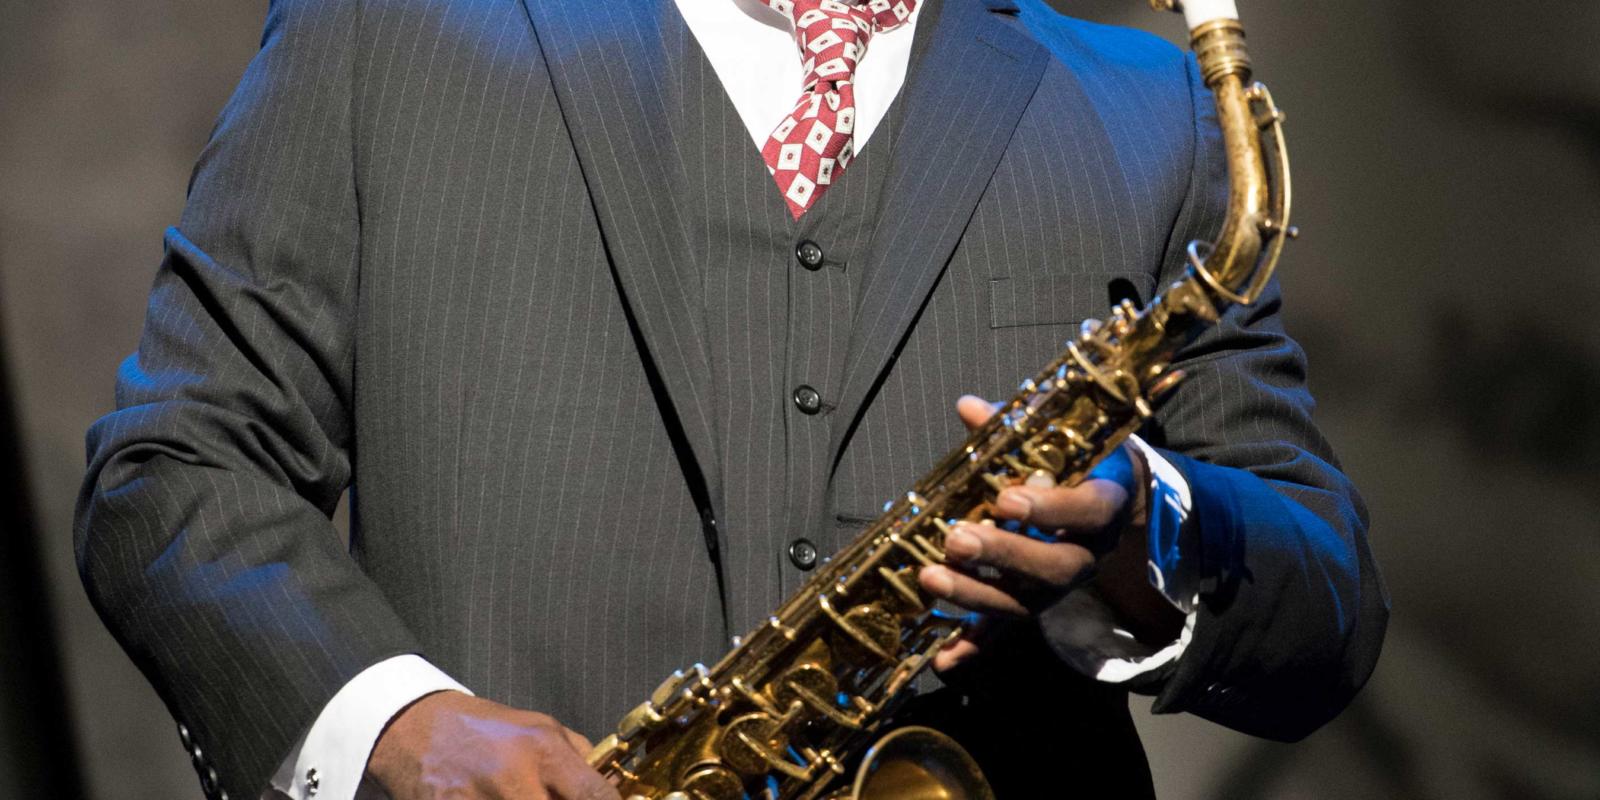 man in a suit, holding his saxophone